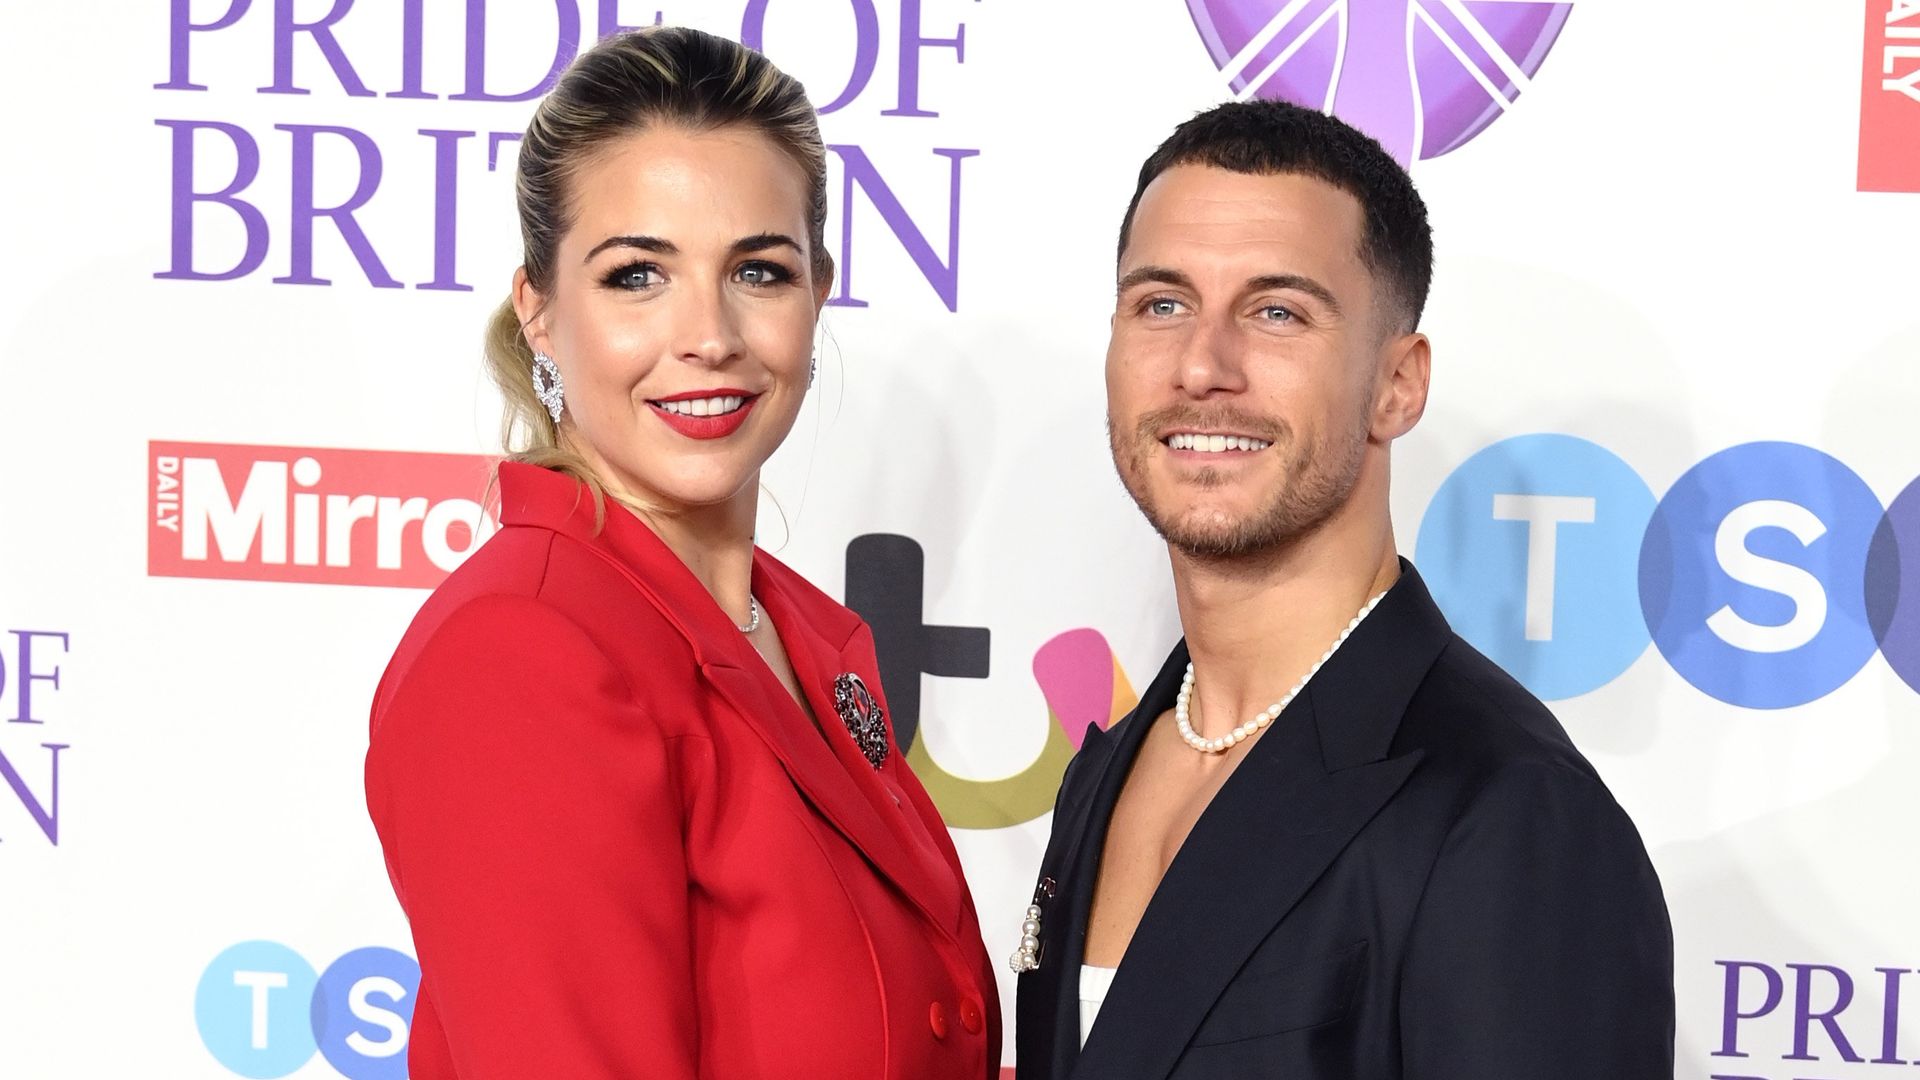 Gemma Atkinson in red suit with Gorka Marquez in black suit